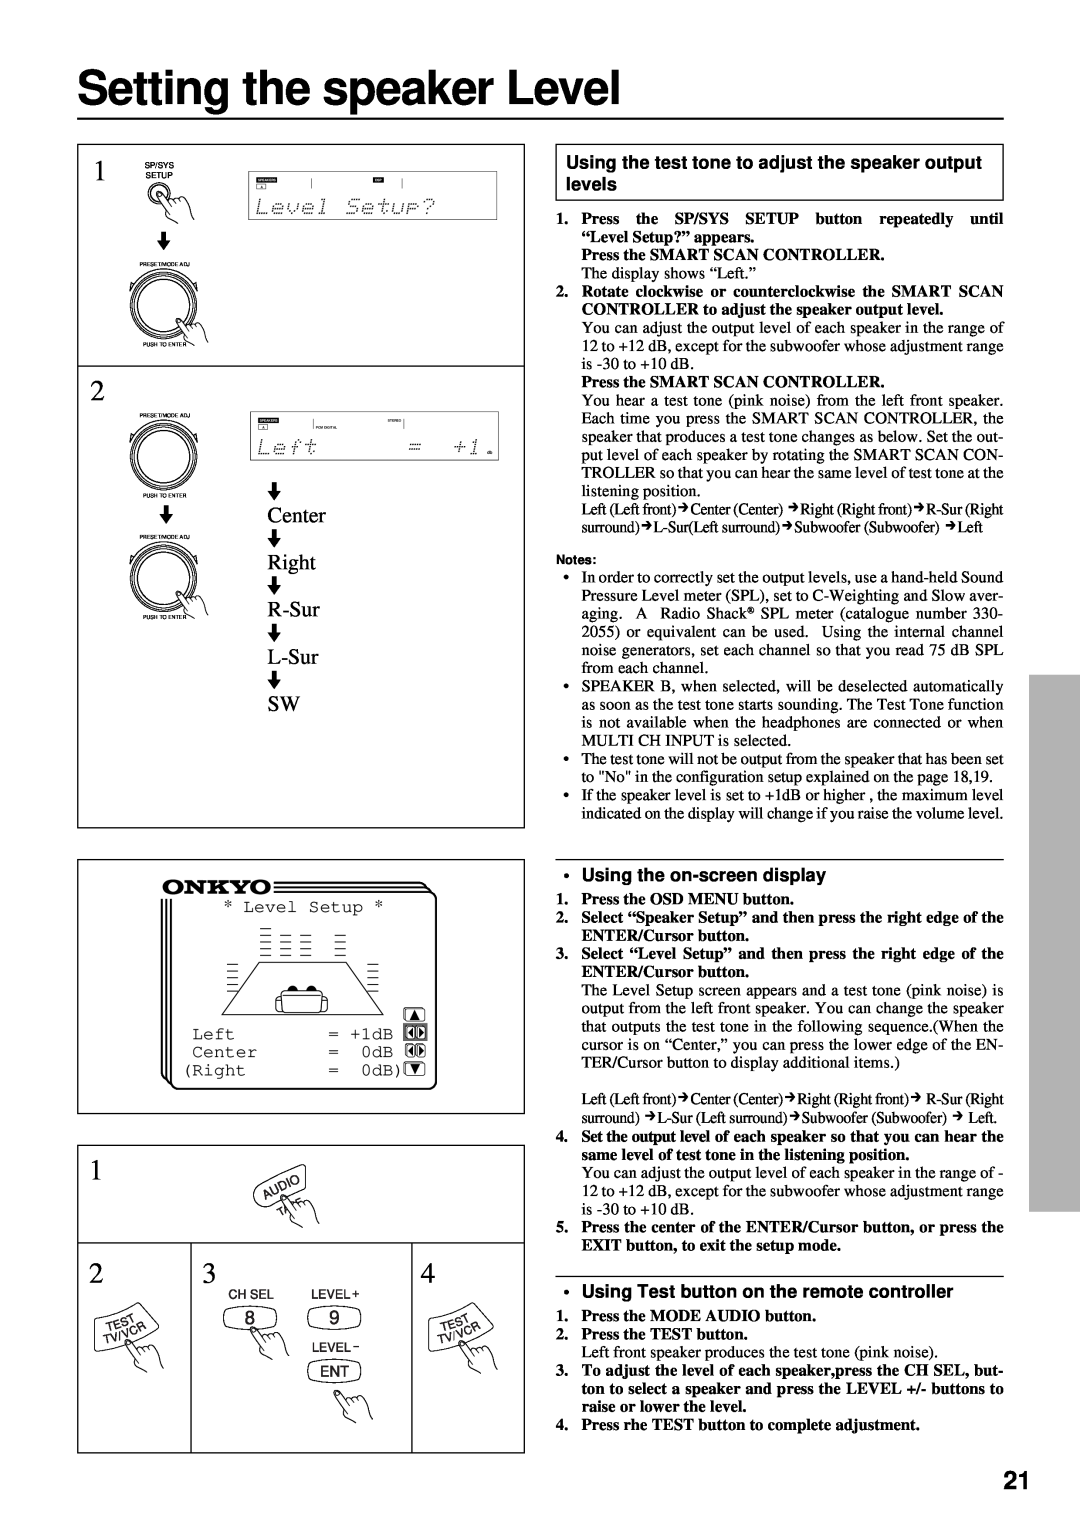 Integra DTR-7 instruction manual Setting the speaker Level, Center, Right, R-Sur, L-Sur SW, Using the on-screendisplay 